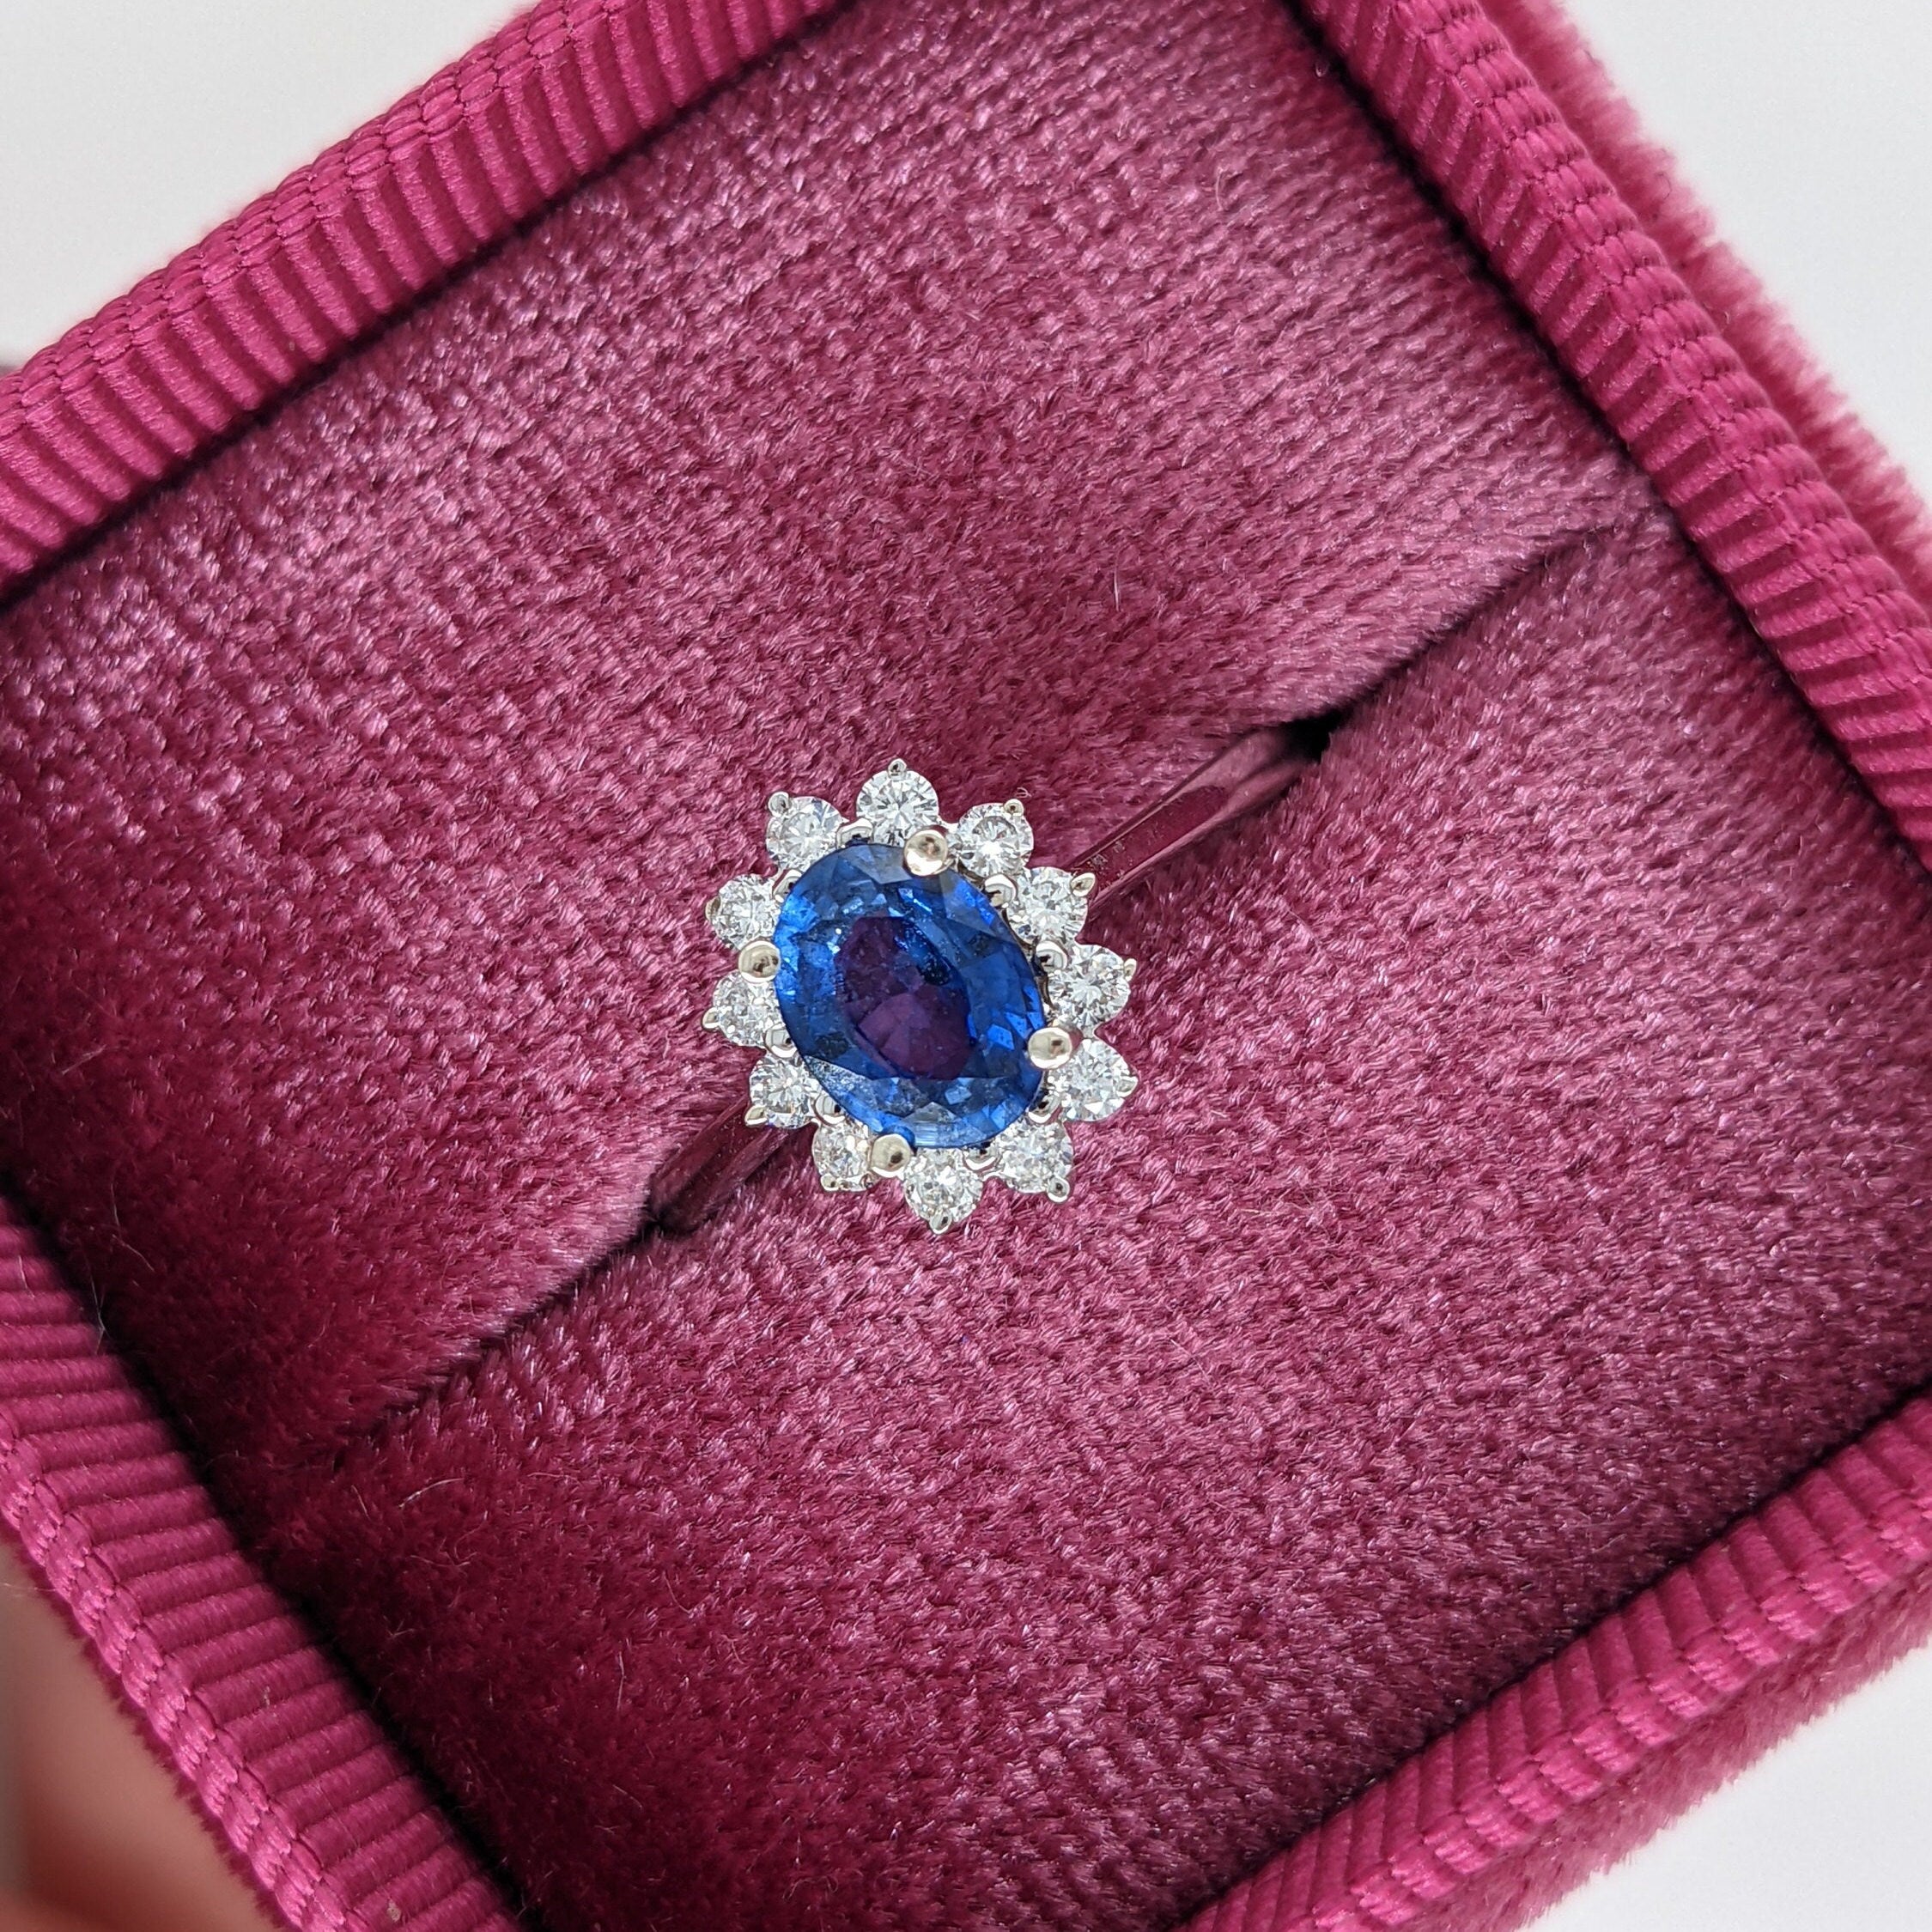 Blue Sapphire in 14K White Gold with Flower Diamond Halo I Oval 7x5mm Approx 1 carat Sapphire I Princess Diana Ring Style I Custom Available